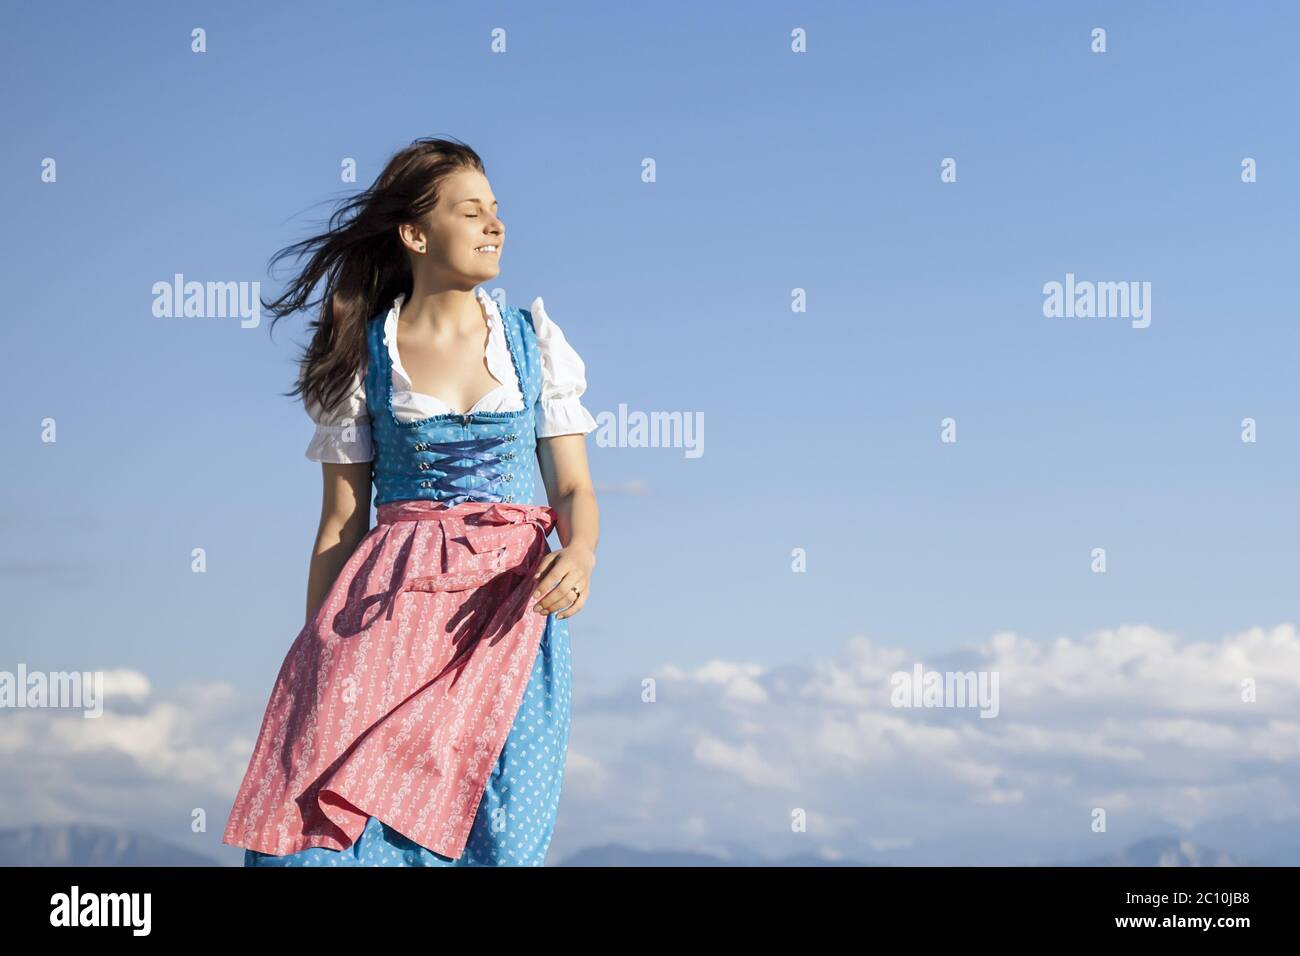 young woman in bavarian traditional dress dirndl Stock Photo